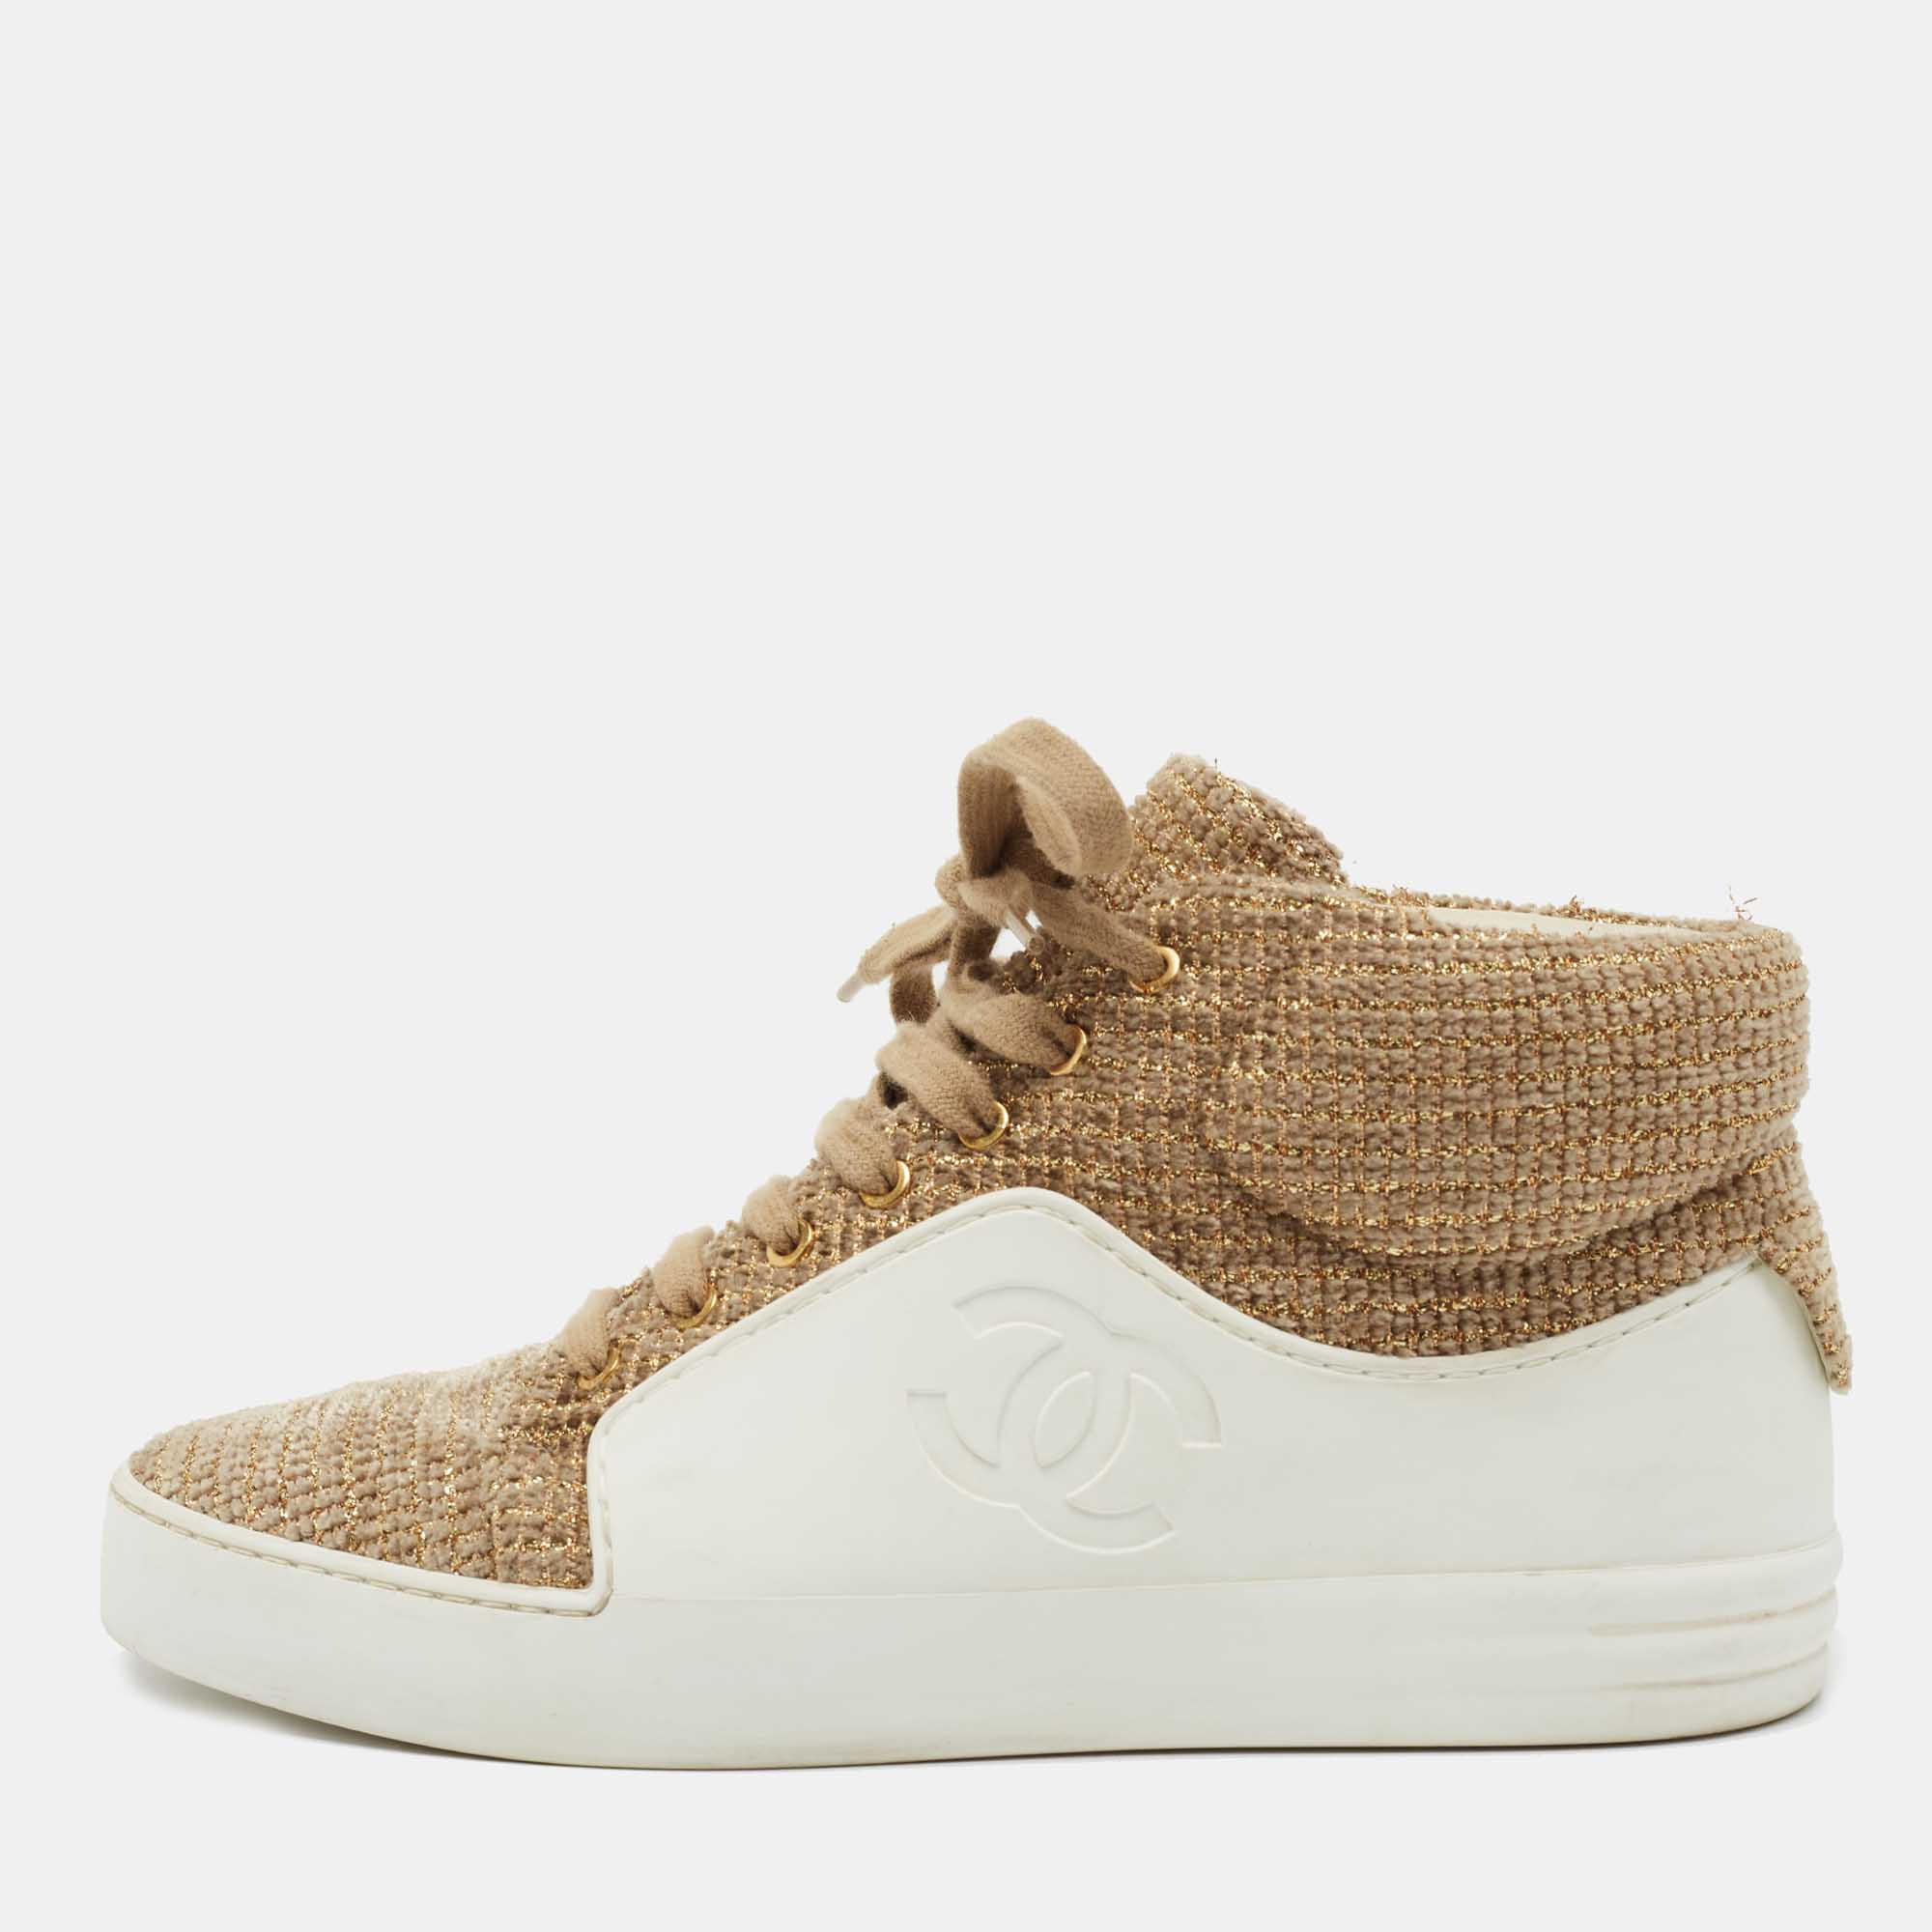 CHANEL Suede & Tweed CC Low Top Sneakers in Beige/White Size 36.5